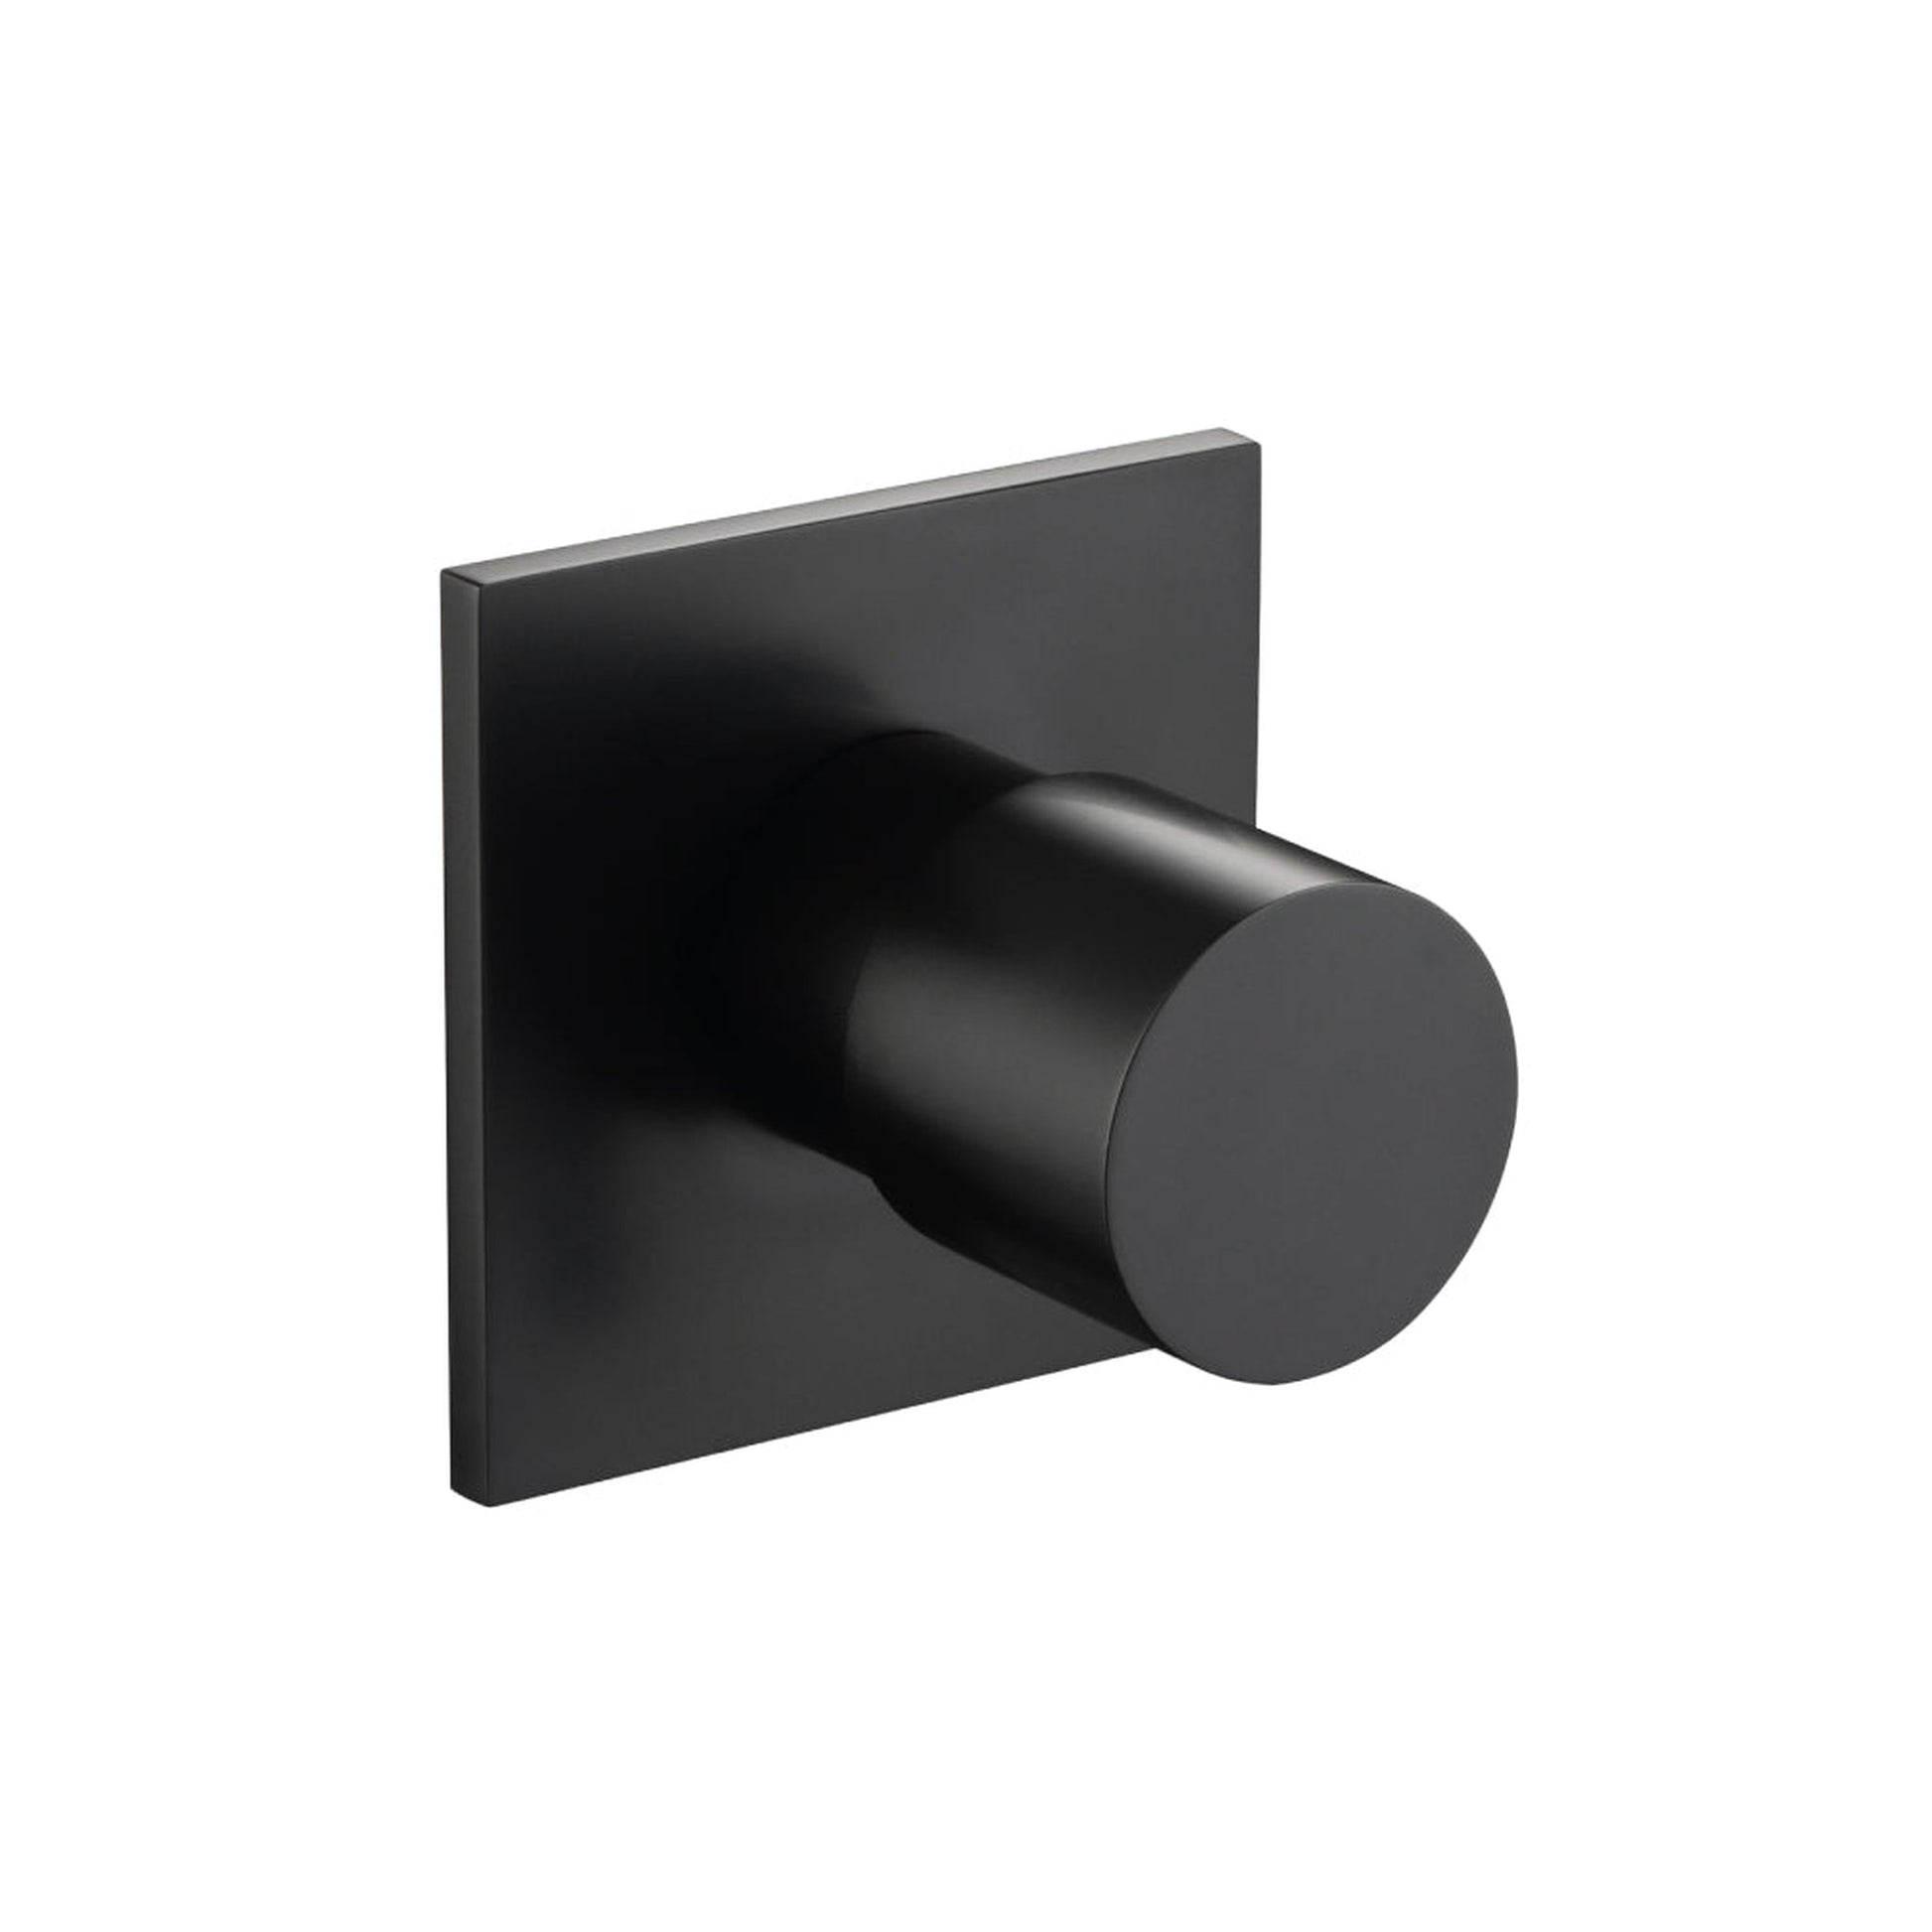 Isenberg Serie 100 3" Matte Black Wall Mounted Shower Faucet Trim With 3-Way Diverter Shower Rough Valve With Shared Outputs and Integrated Volume Control